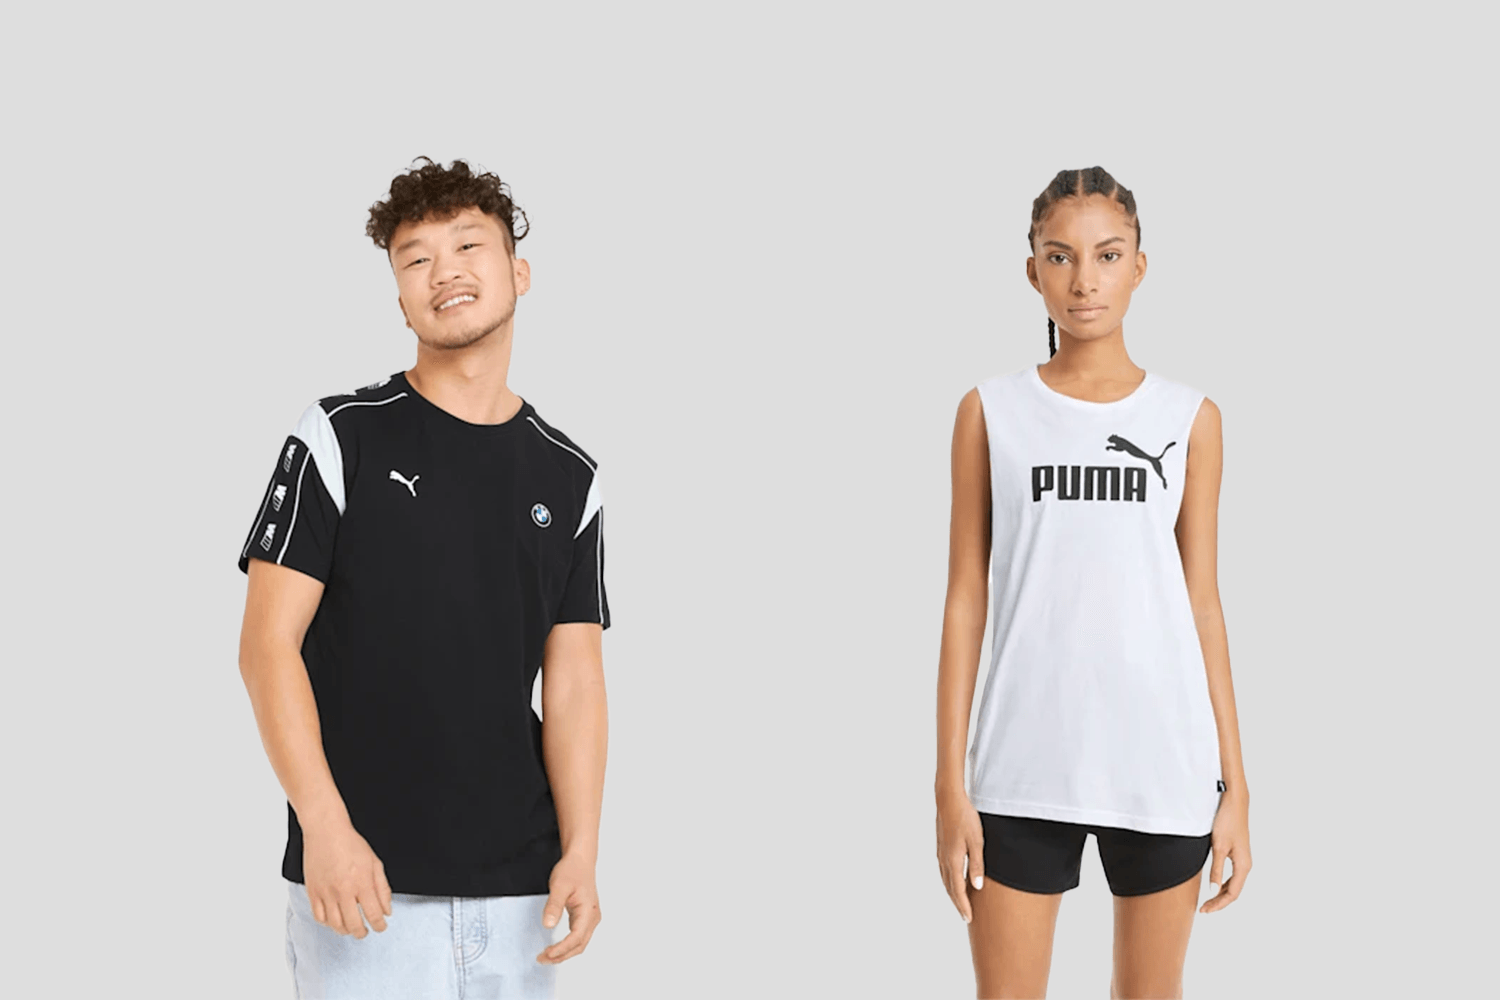 Get up to 60% off during the Private Sale at PUMA